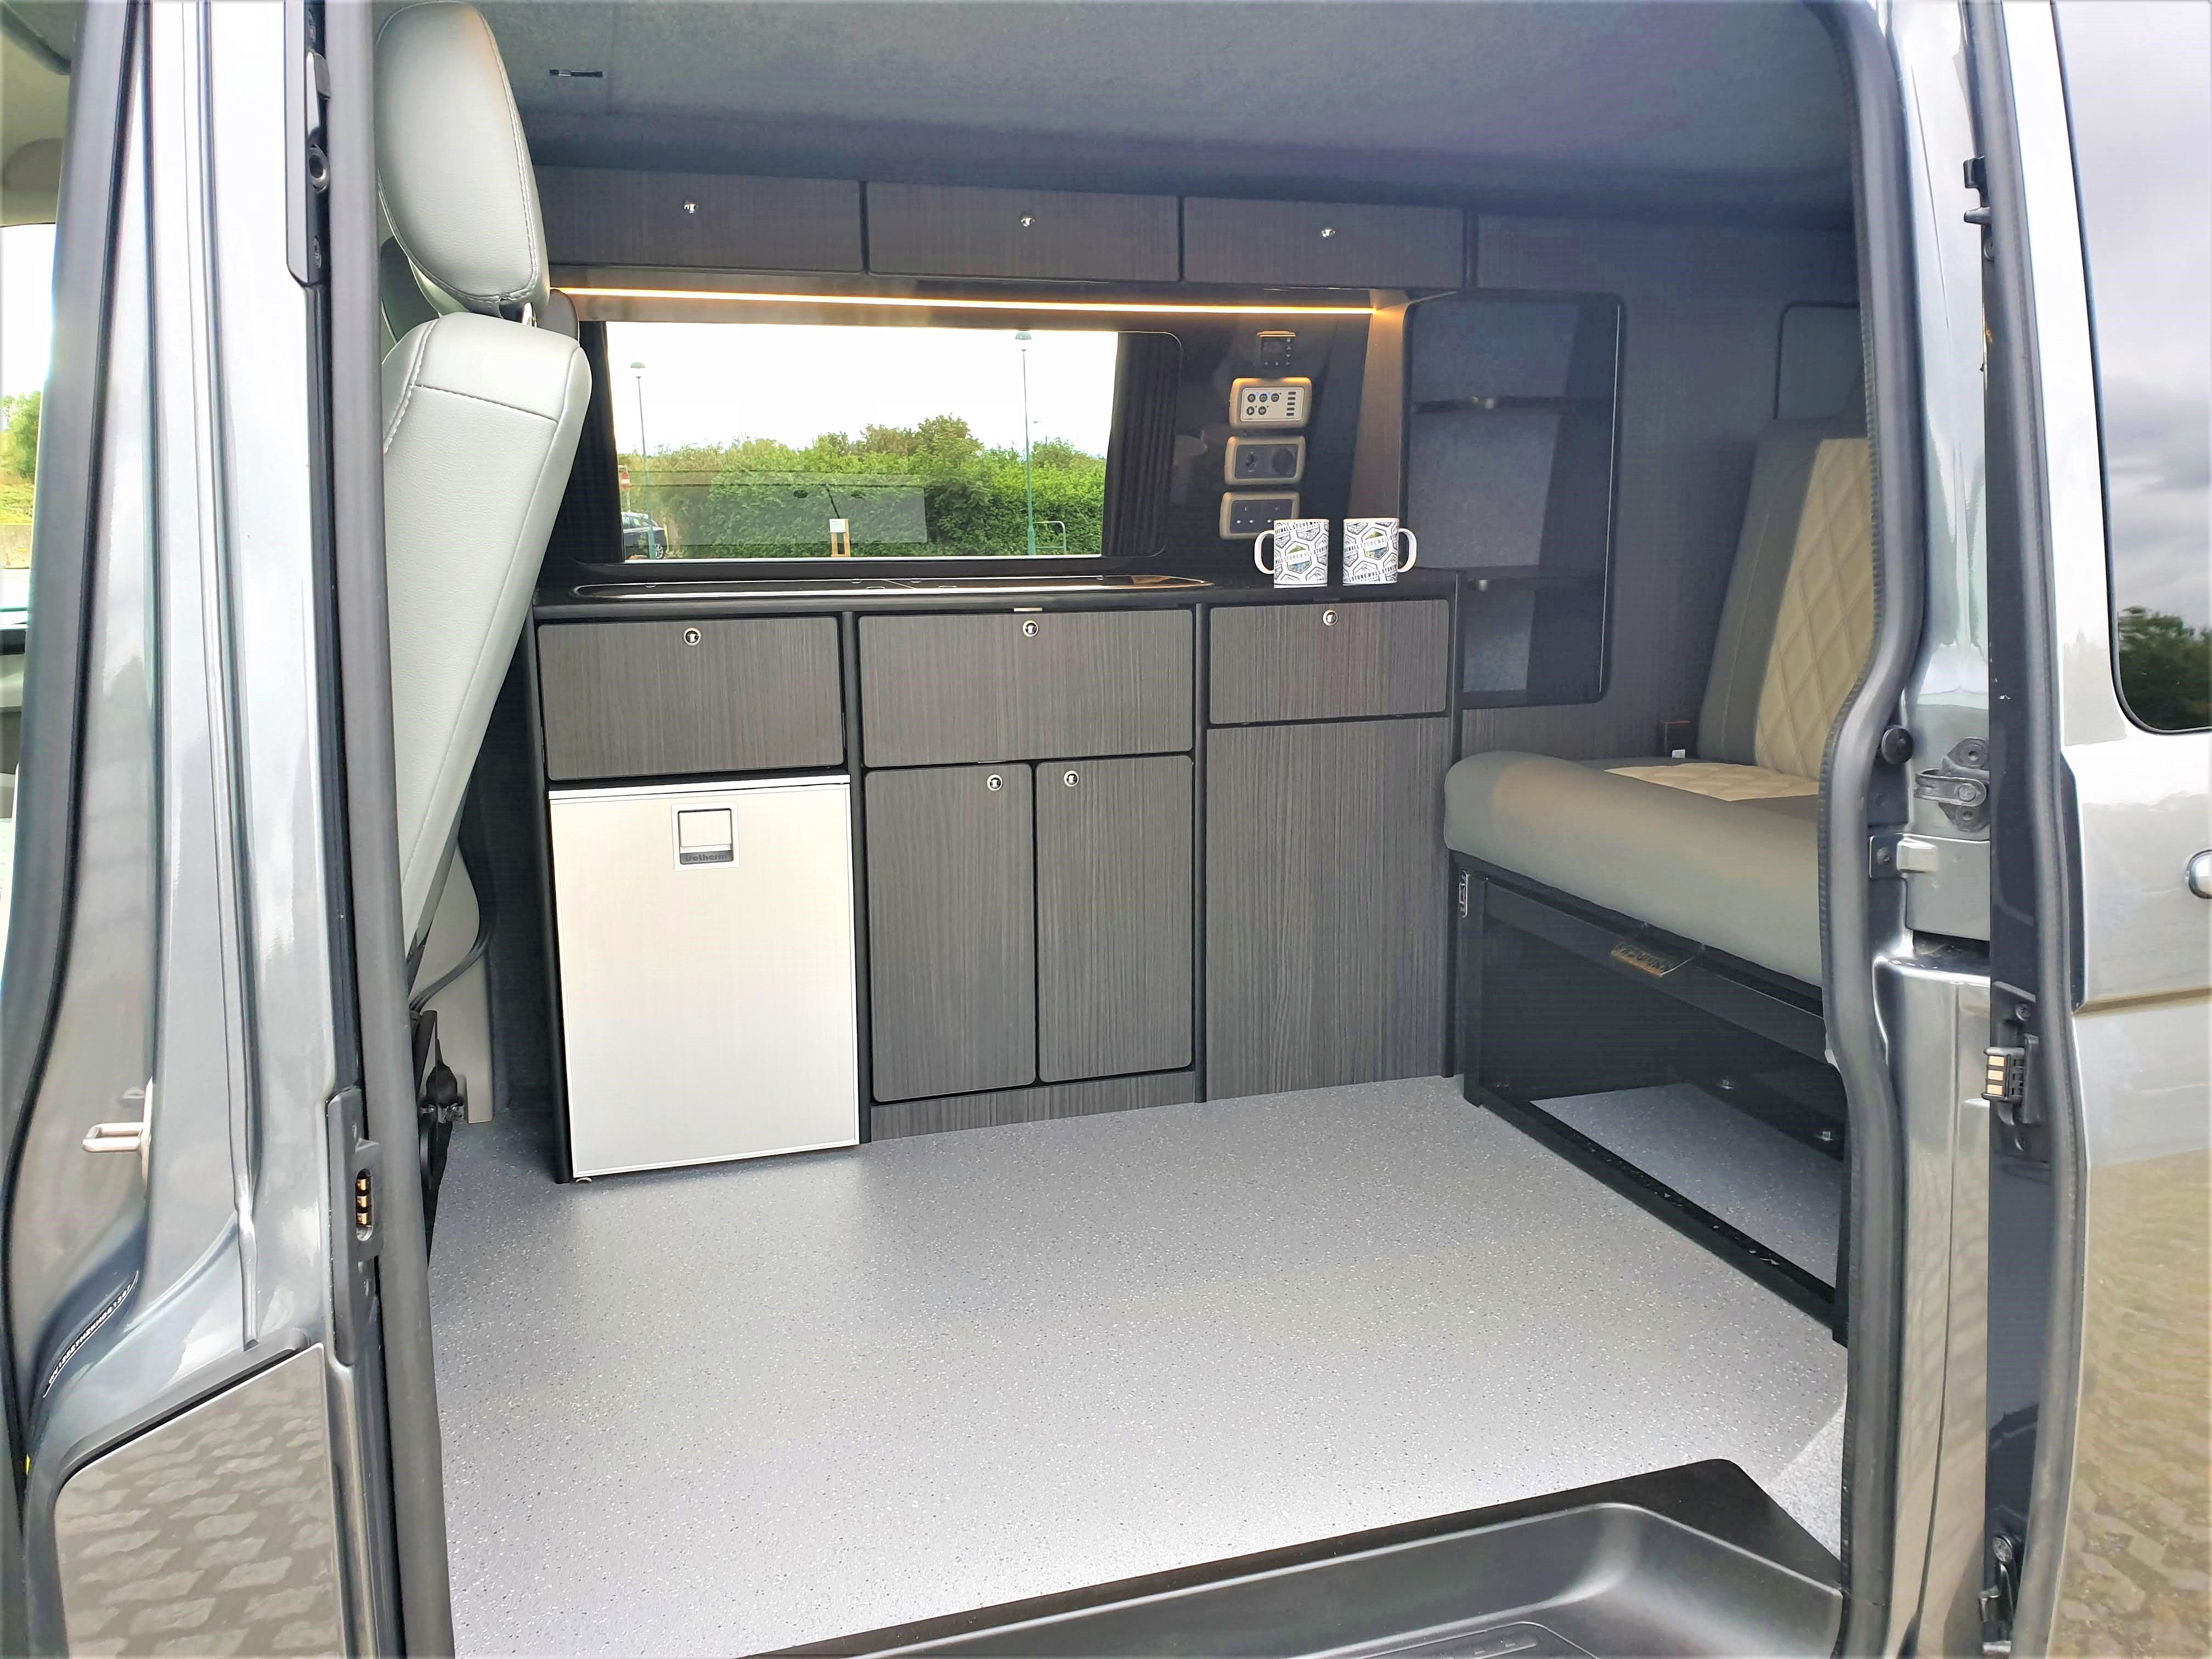 Van Conversion with Accessories Including Fridge and Lighting